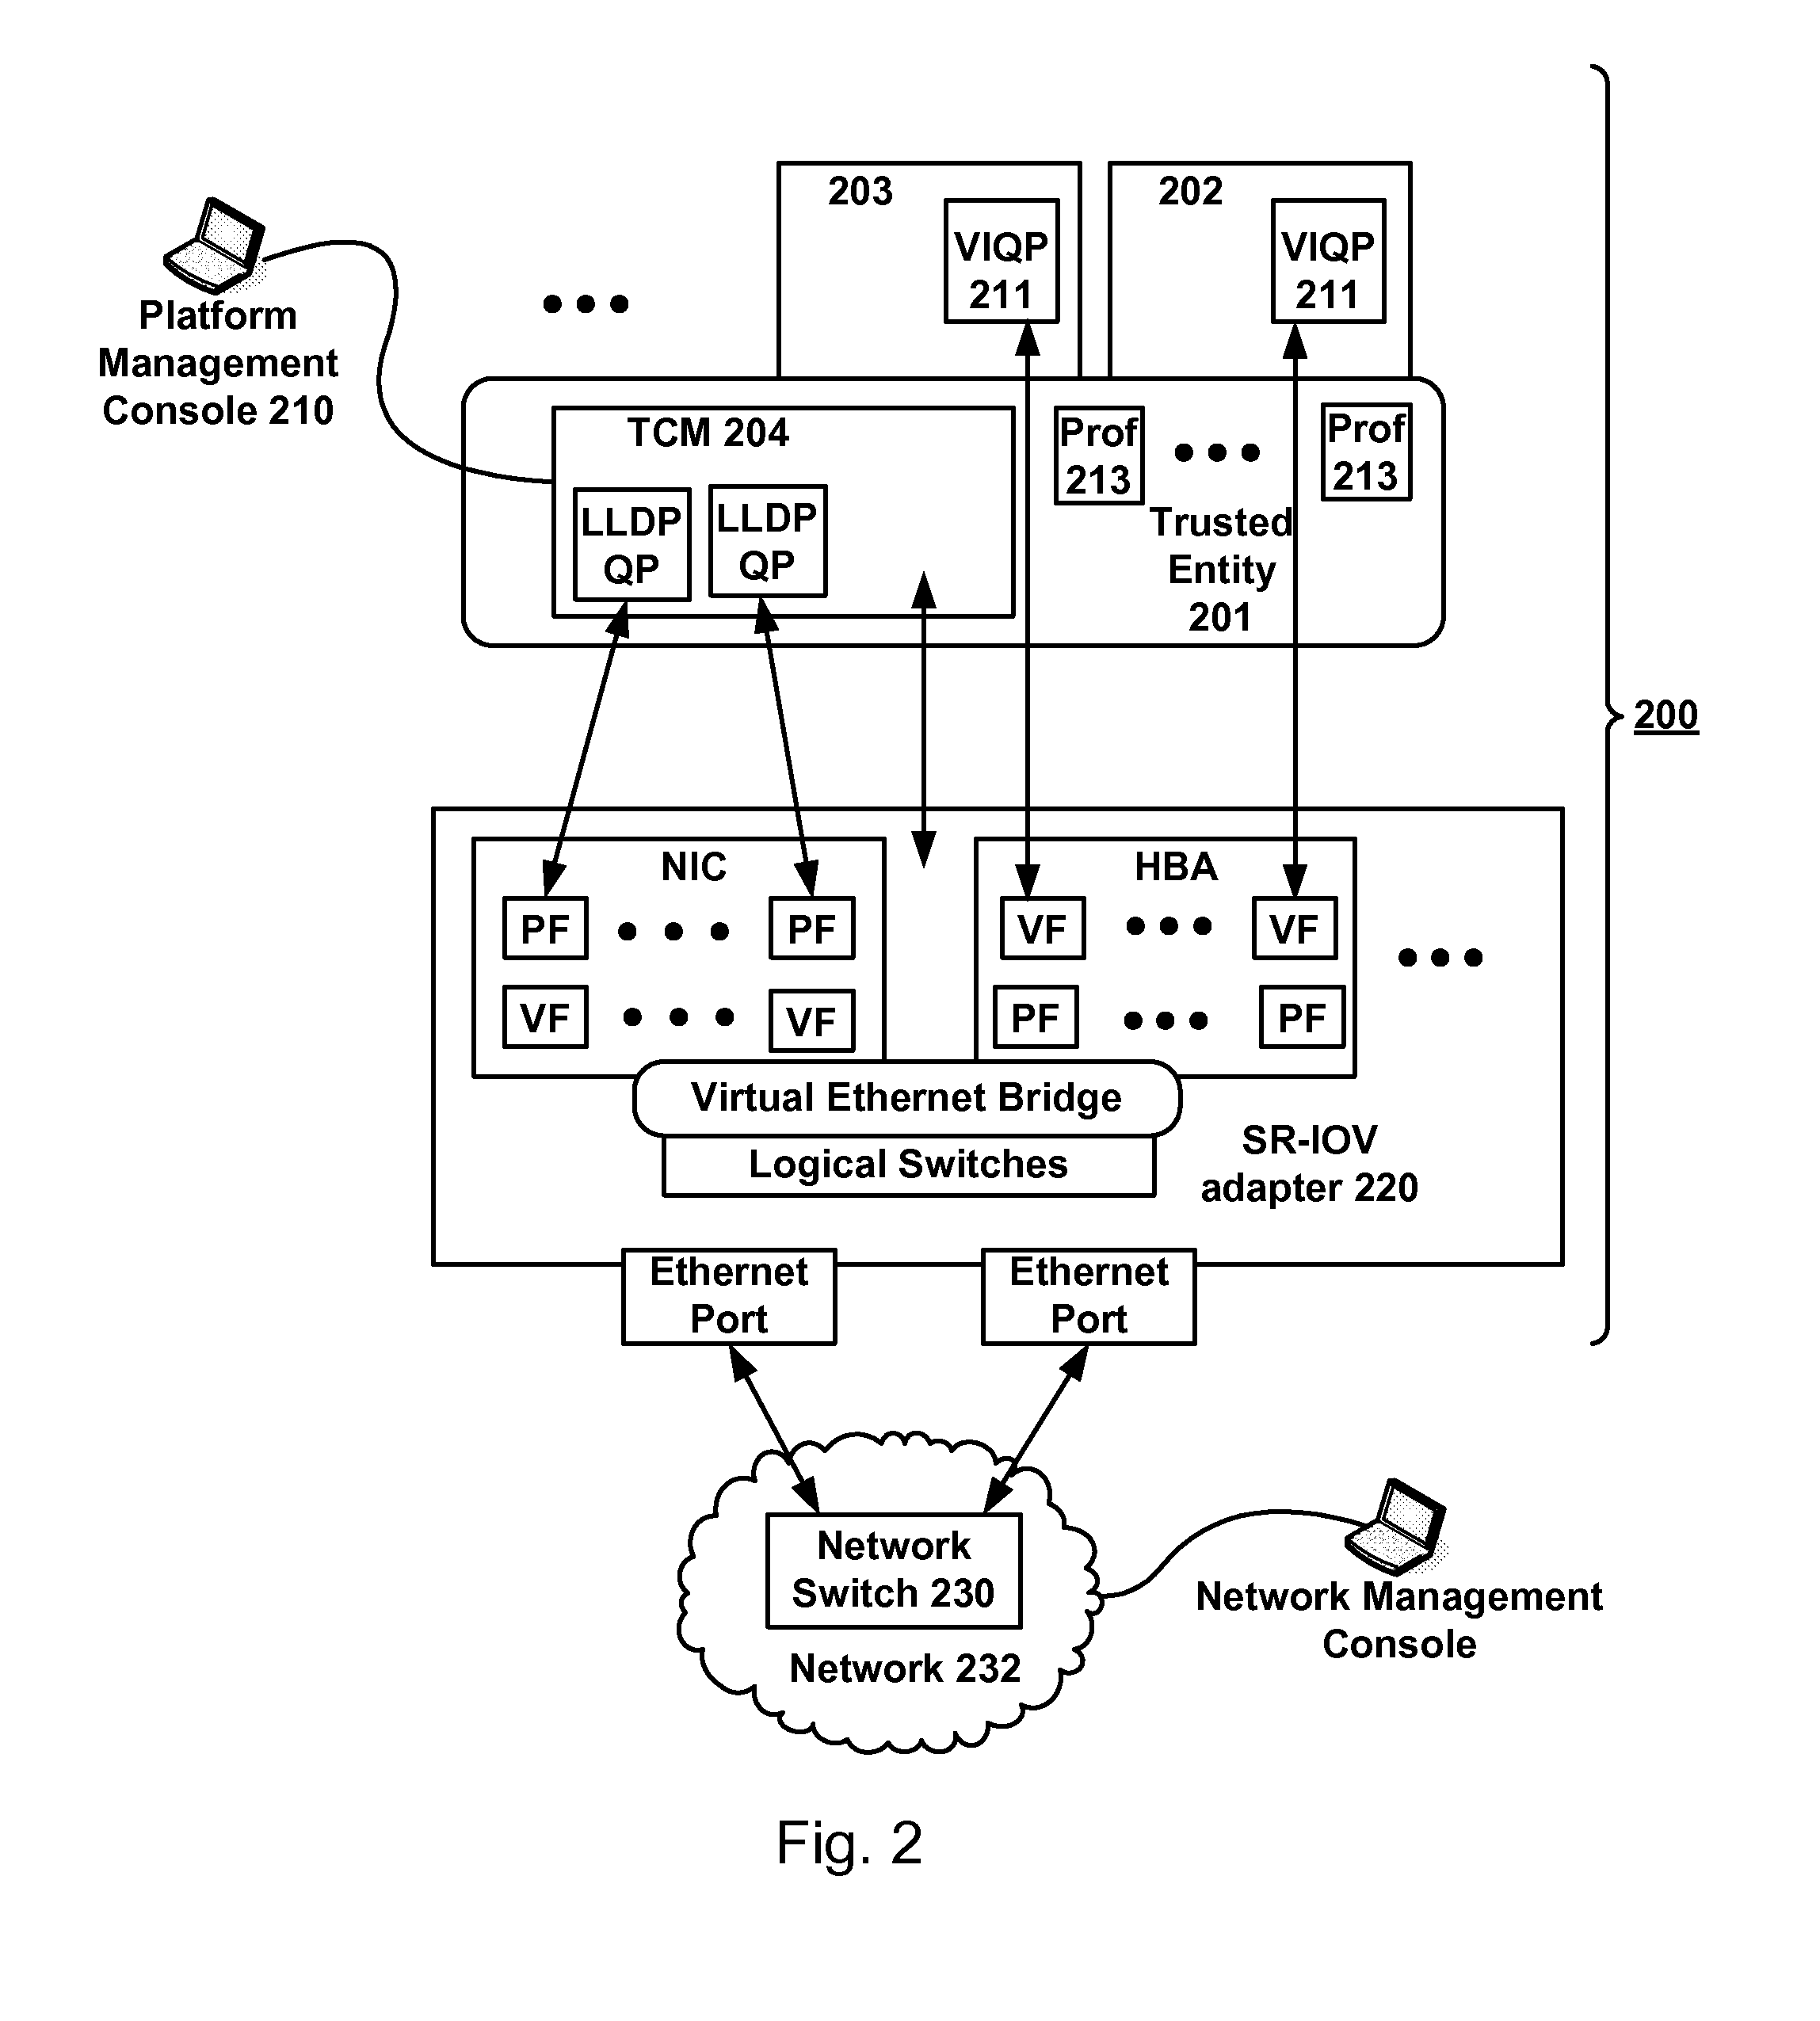 Discovery and Capability Exchange Management in a Virtualized Computing Platform Utilizing a SR-IOV Adapter